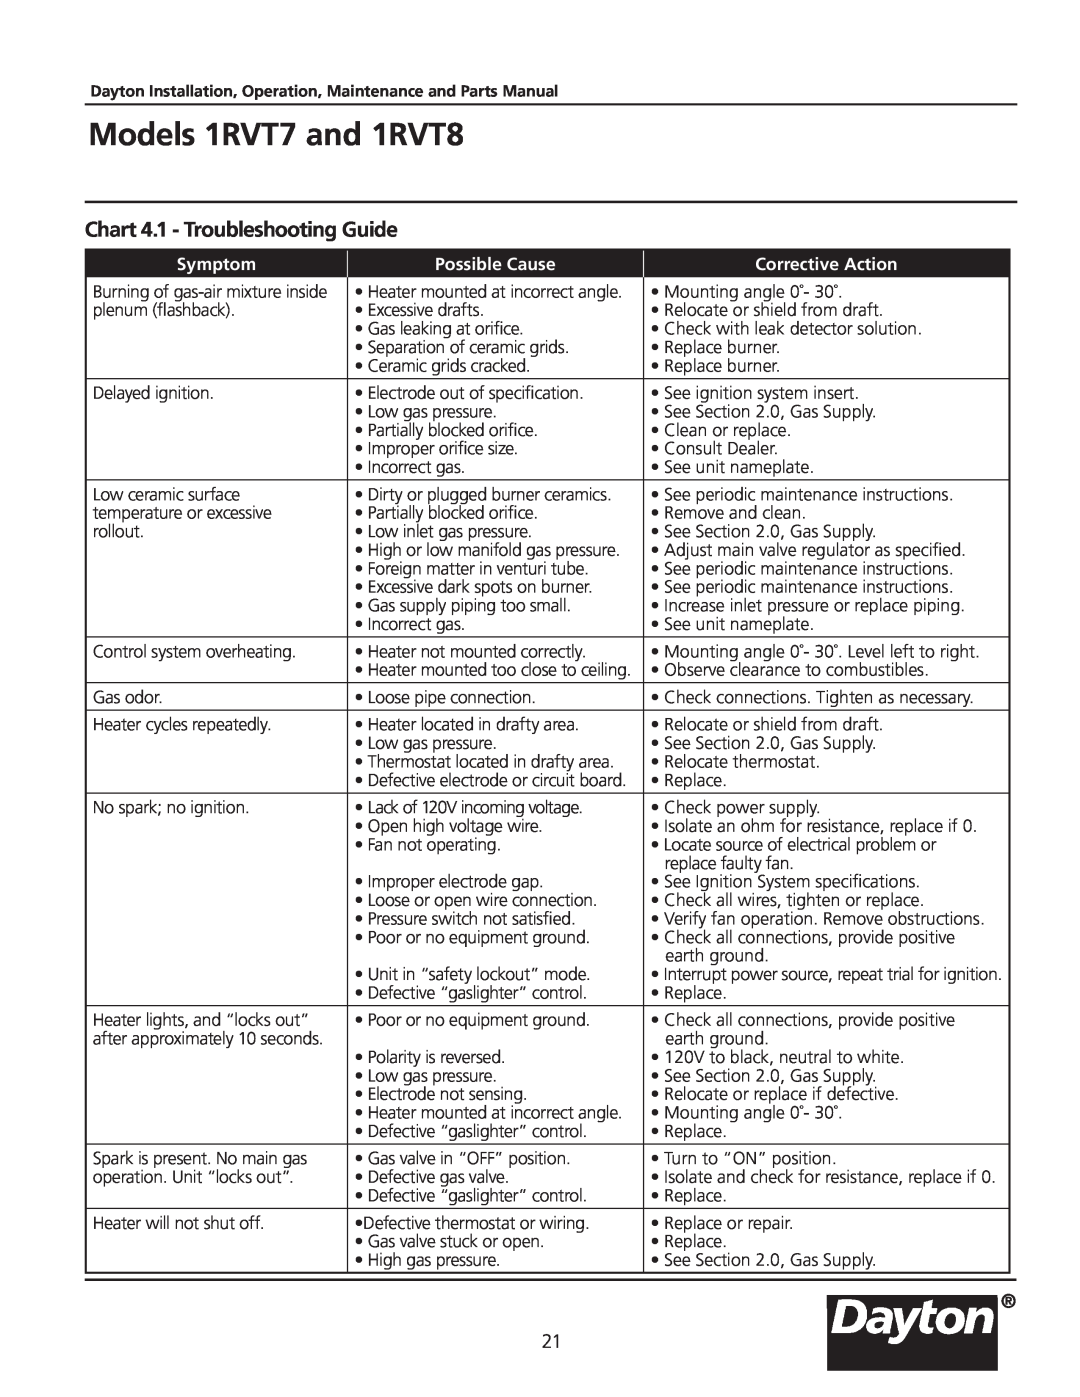 Dayton manual Chart 4.1 - Troubleshooting Guide, Models 1RVT7 and 1RVT8, Symptom, Possible Cause, Corrective Action 